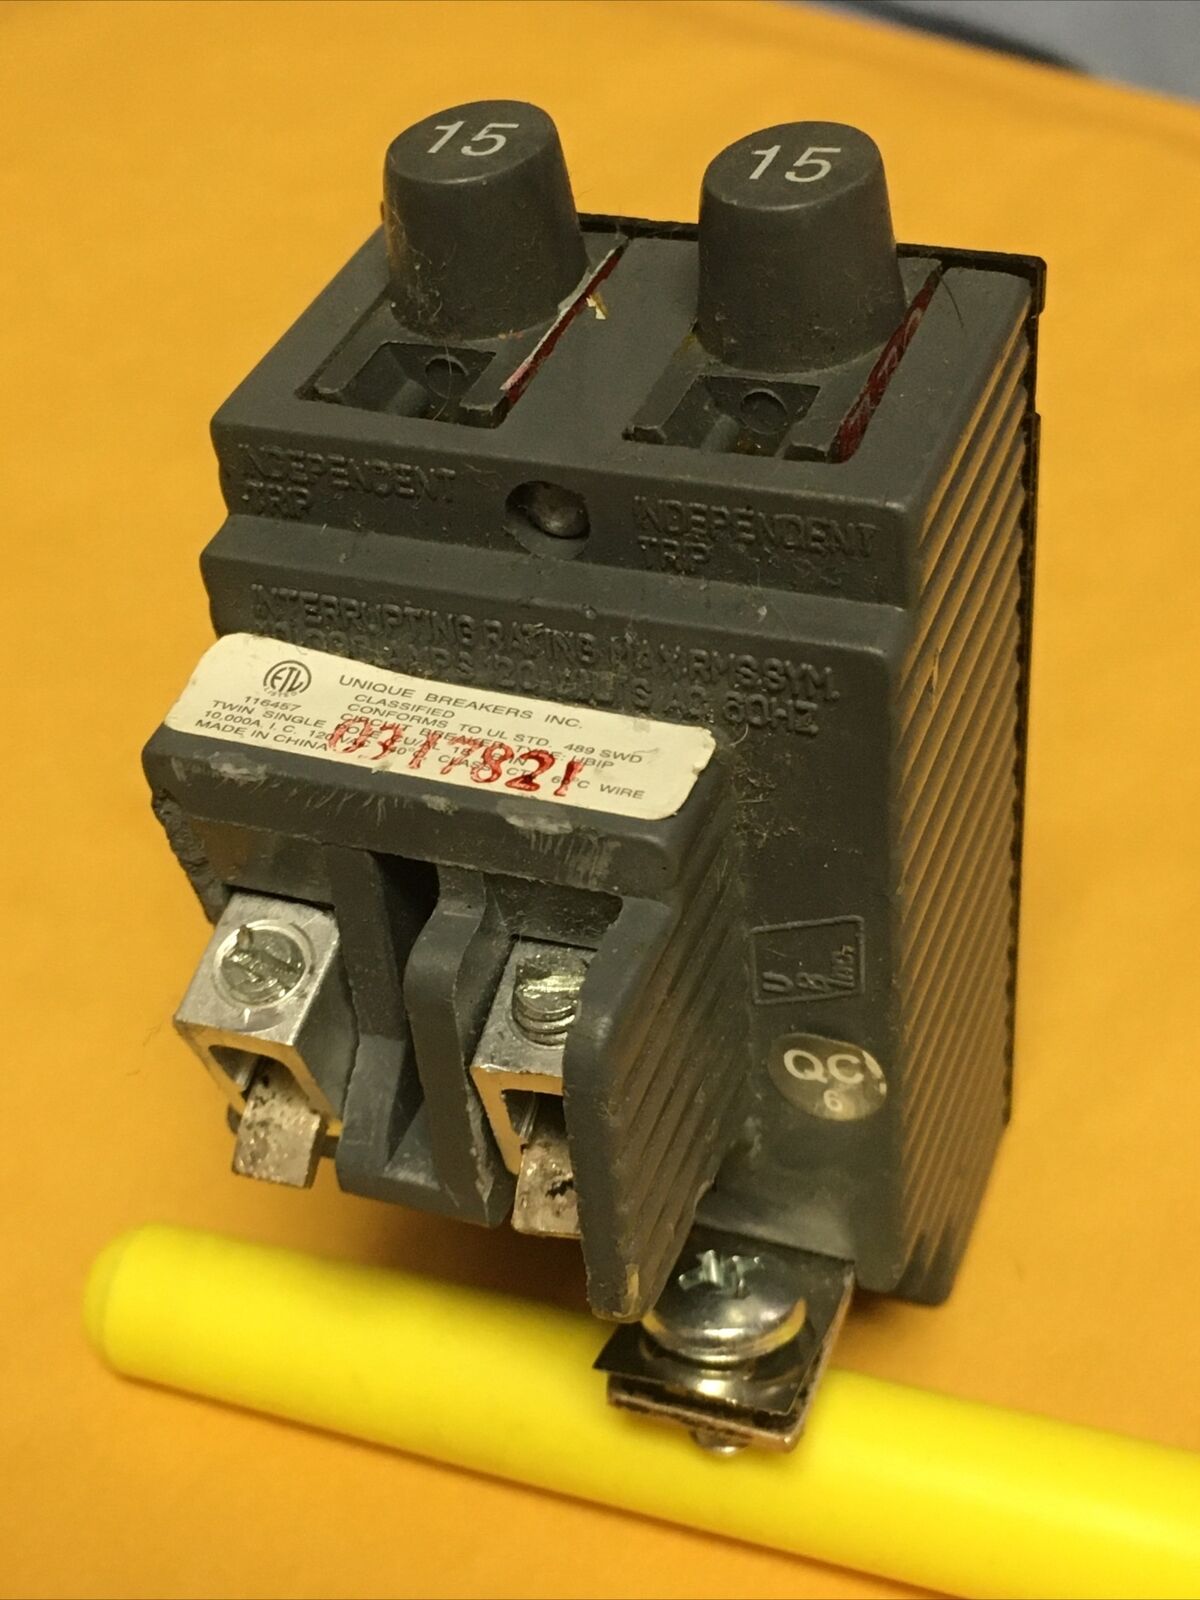 Pushmatic P1515 Twin Circuit [Alternative dealer] Breaker Ranking TOP18 with See tab pictures.